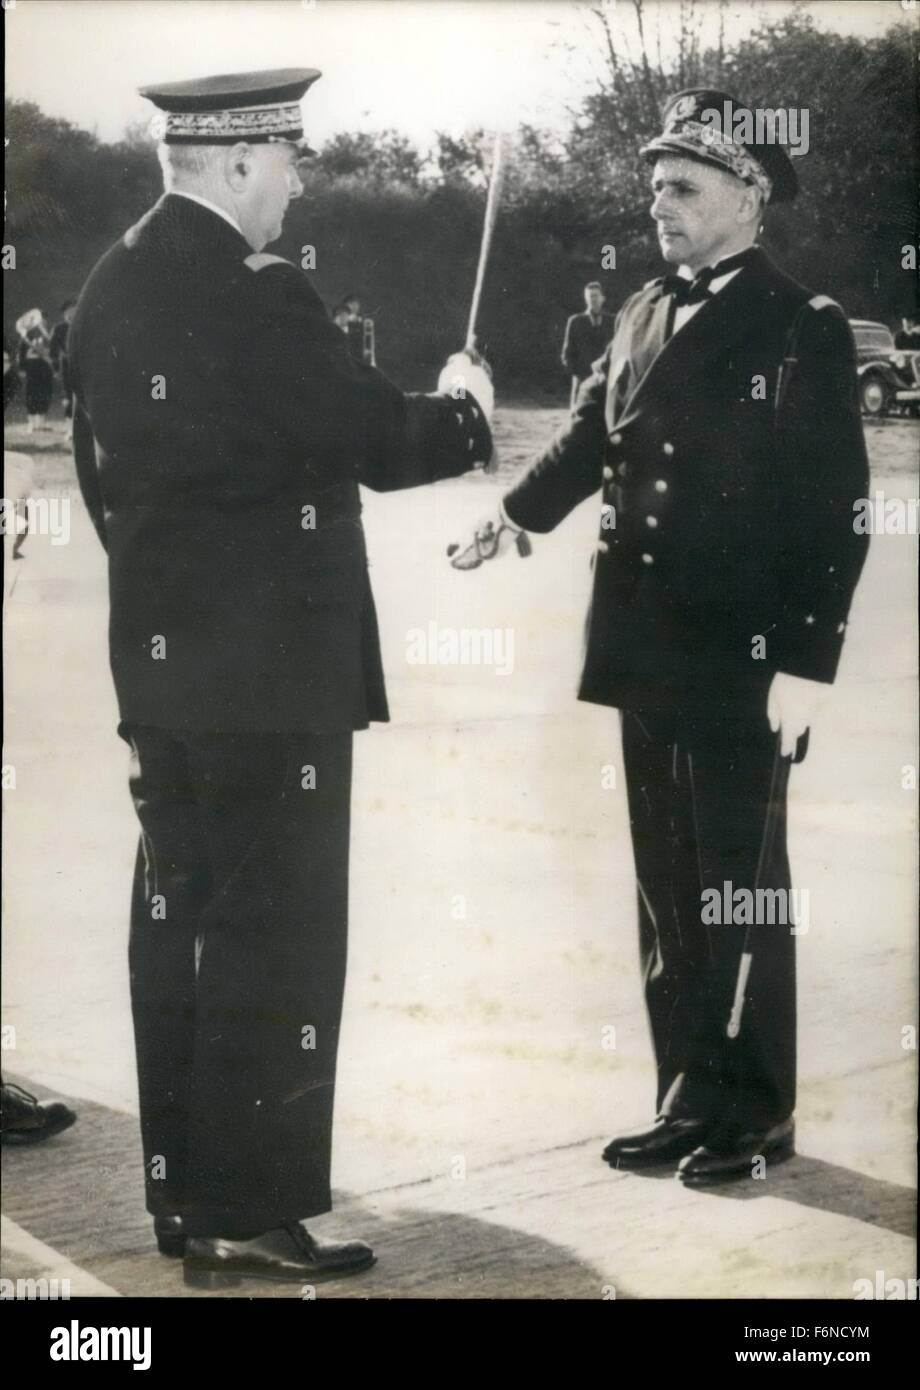 1956 - Admiral at 46 Admiral Patou, Commander of the Navy at Lorient, aged 46, who is the youngest high ranking officer in the French Navy, received the insignia of the Commander of the Foreign Legion at Lorient, yesterday. OPS: Rear-Admiral Jourdain decorating Admiral Patou. Nov. 17/56 © Keystone Pictures USA/ZUMAPRESS.com/Alamy Live News Stock Photo